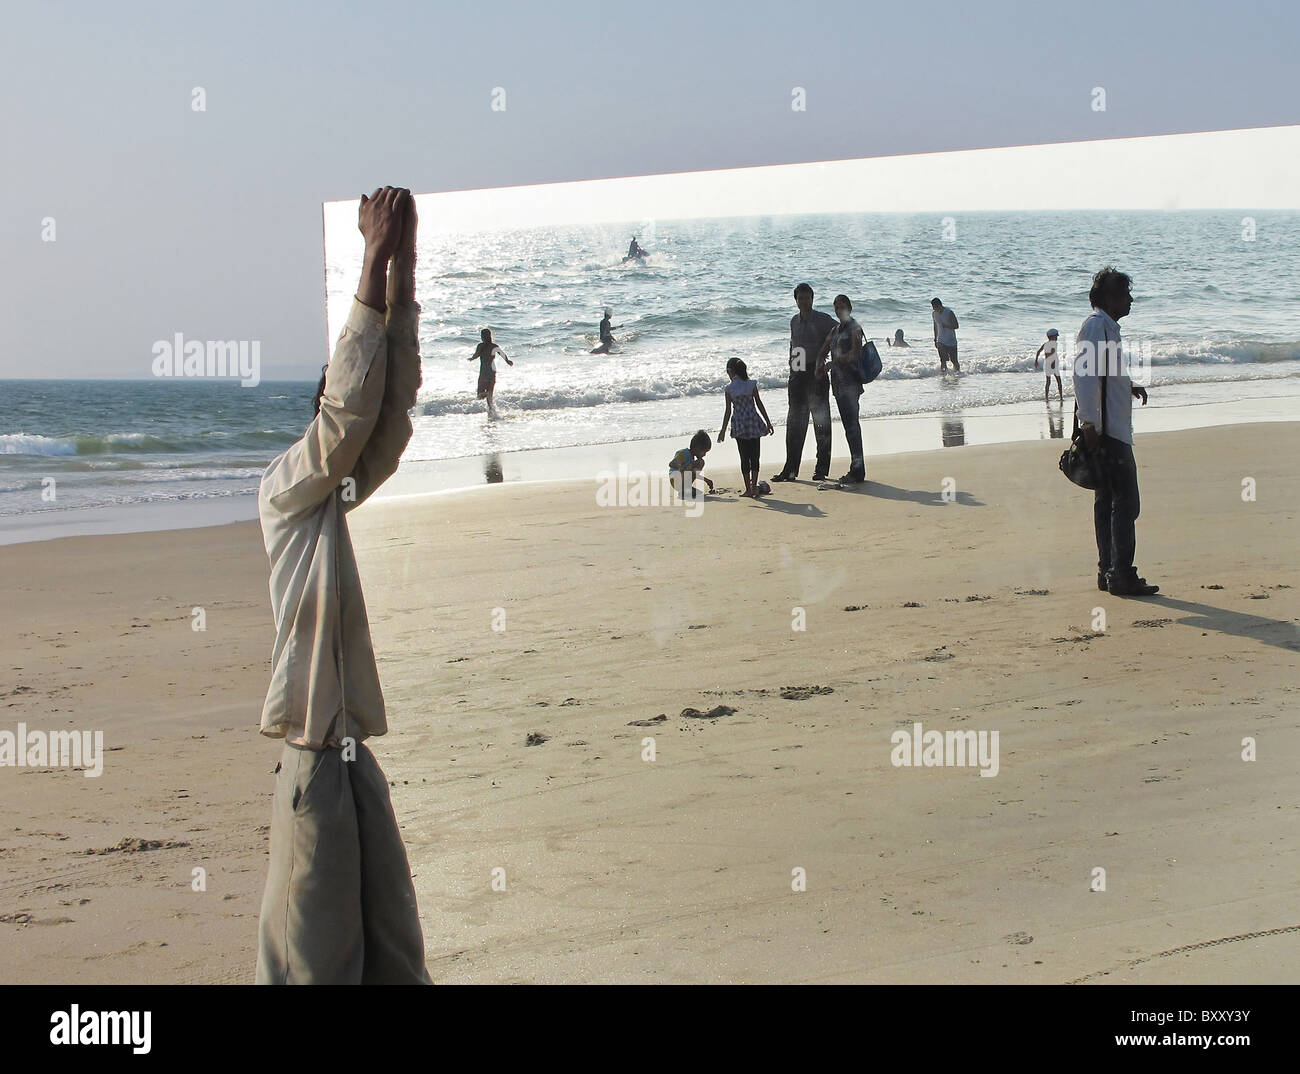 A worker guards a giant mirror on Majorda Beach, Goa, India which was being readied for the production of a Bollywood Movie bein Stock Photo